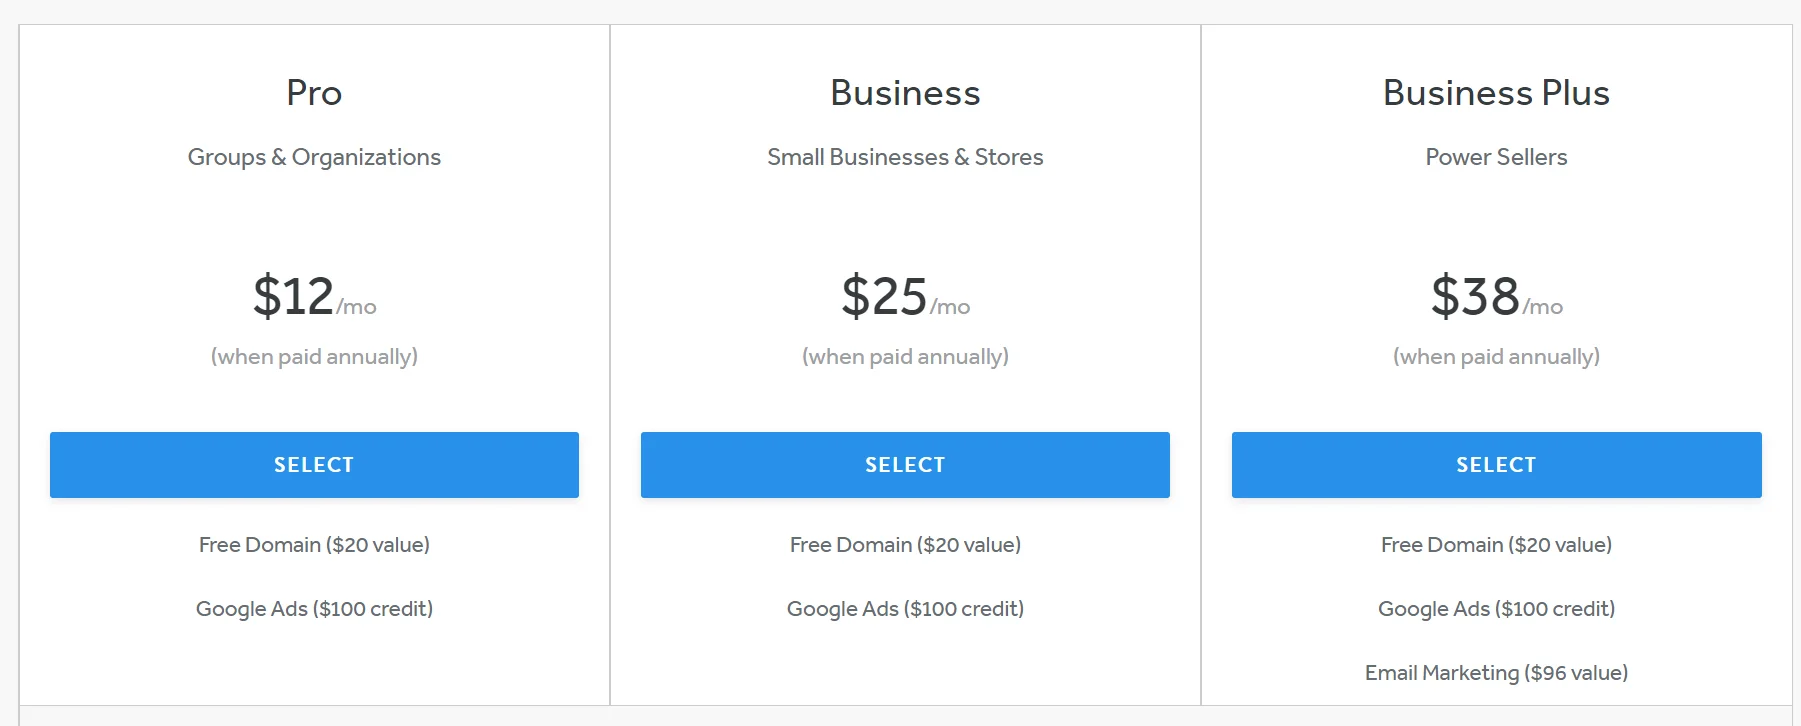 Weebly pricing